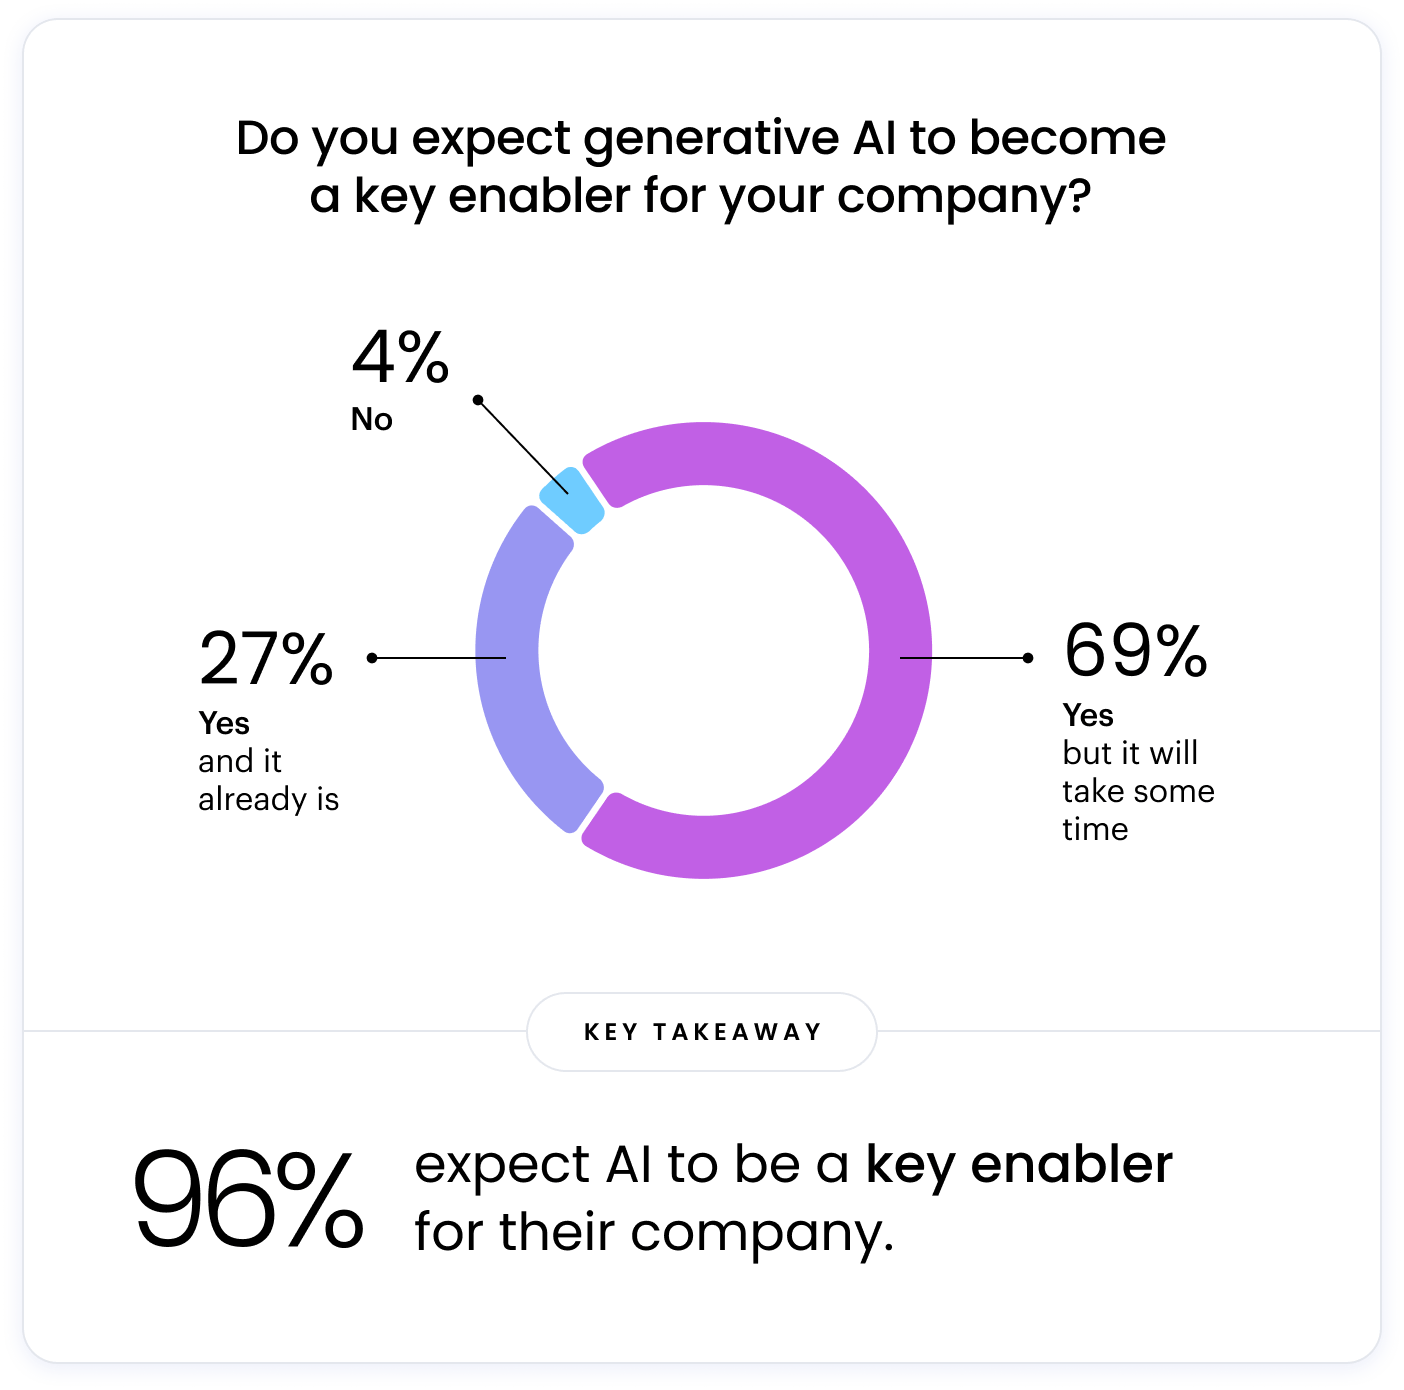 The image reveals a doughnut chart, boldly asking, "Do you expect generative AI to become a key enabler for your company?" The responses are telling: "Yes, and it already is" (27%), "Yes, but it will take some time" (69%), and "No" (4%). An overwhelming 96% anticipate AI to be a game-changer for their company.